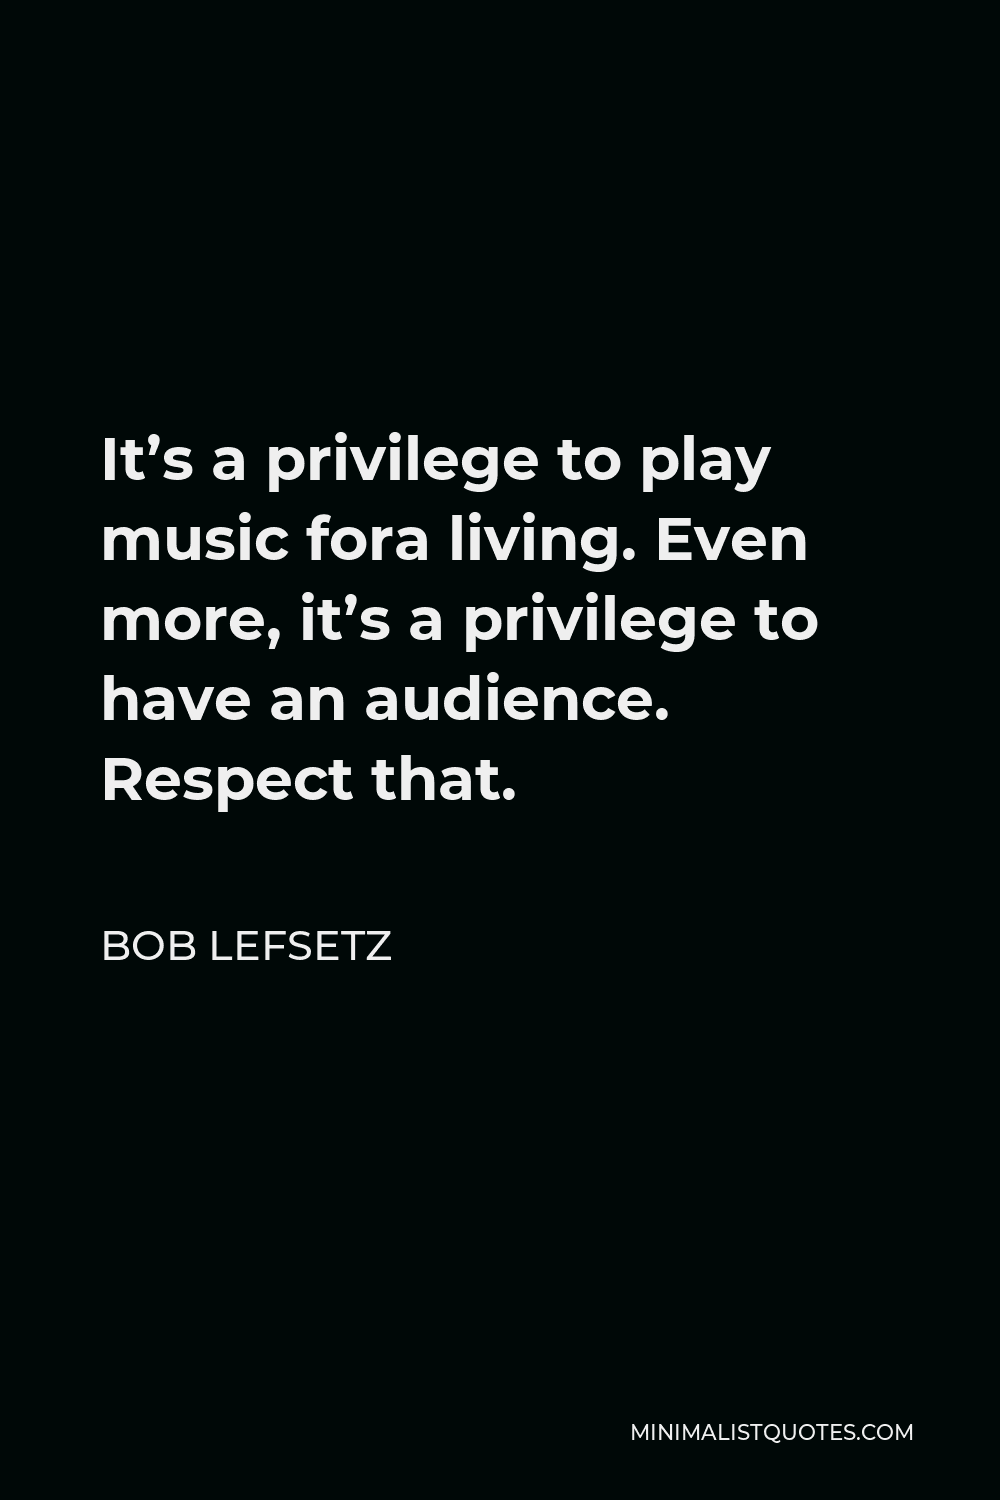 Bob Lefsetz Quote - It’s a privilege to play music fora living. Even more, it’s a privilege to have an audience. Respect that.